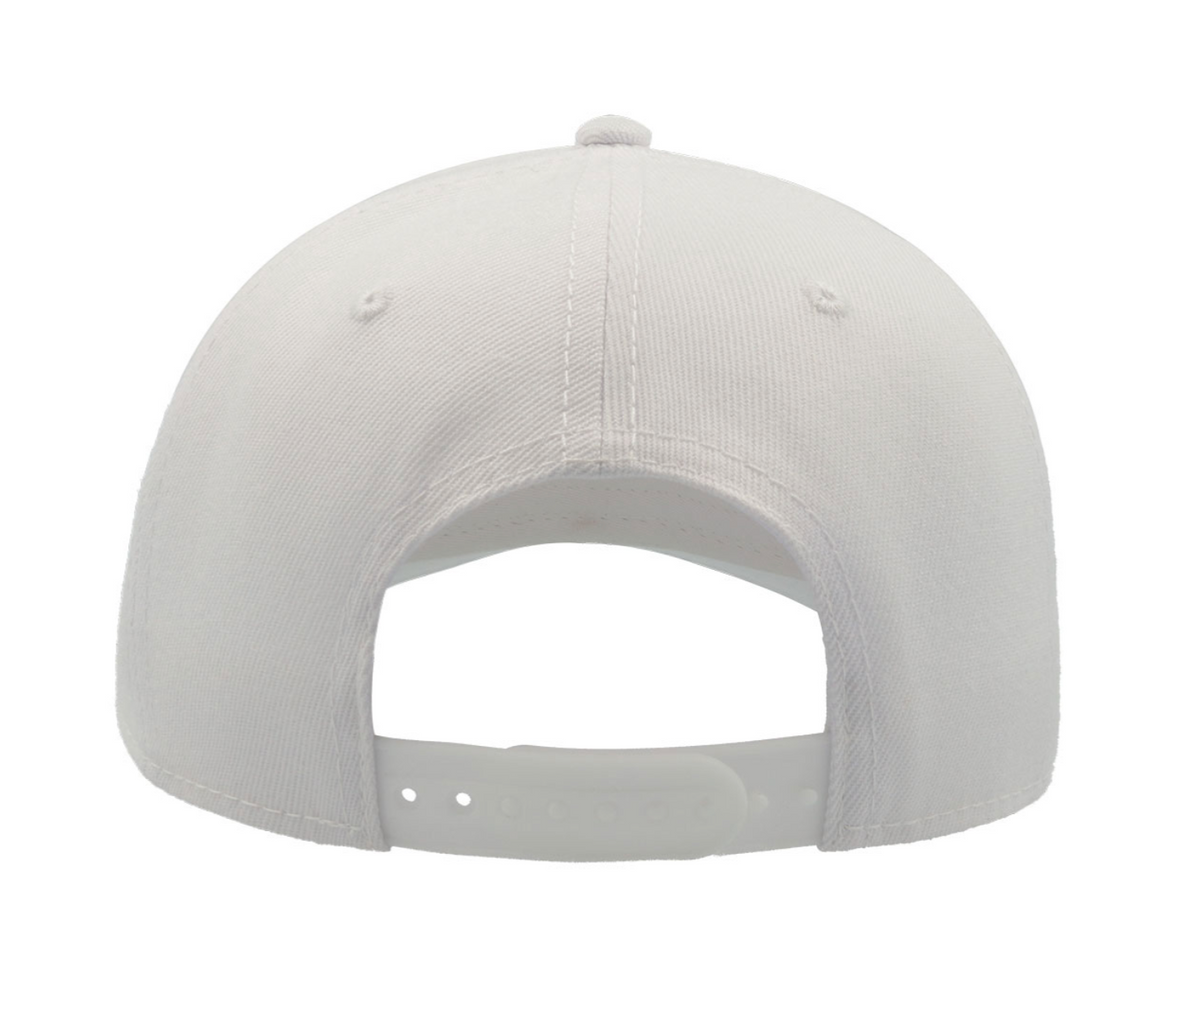 Titties Snapback Hat Black with White Golf Snapback Cap for Bachelor